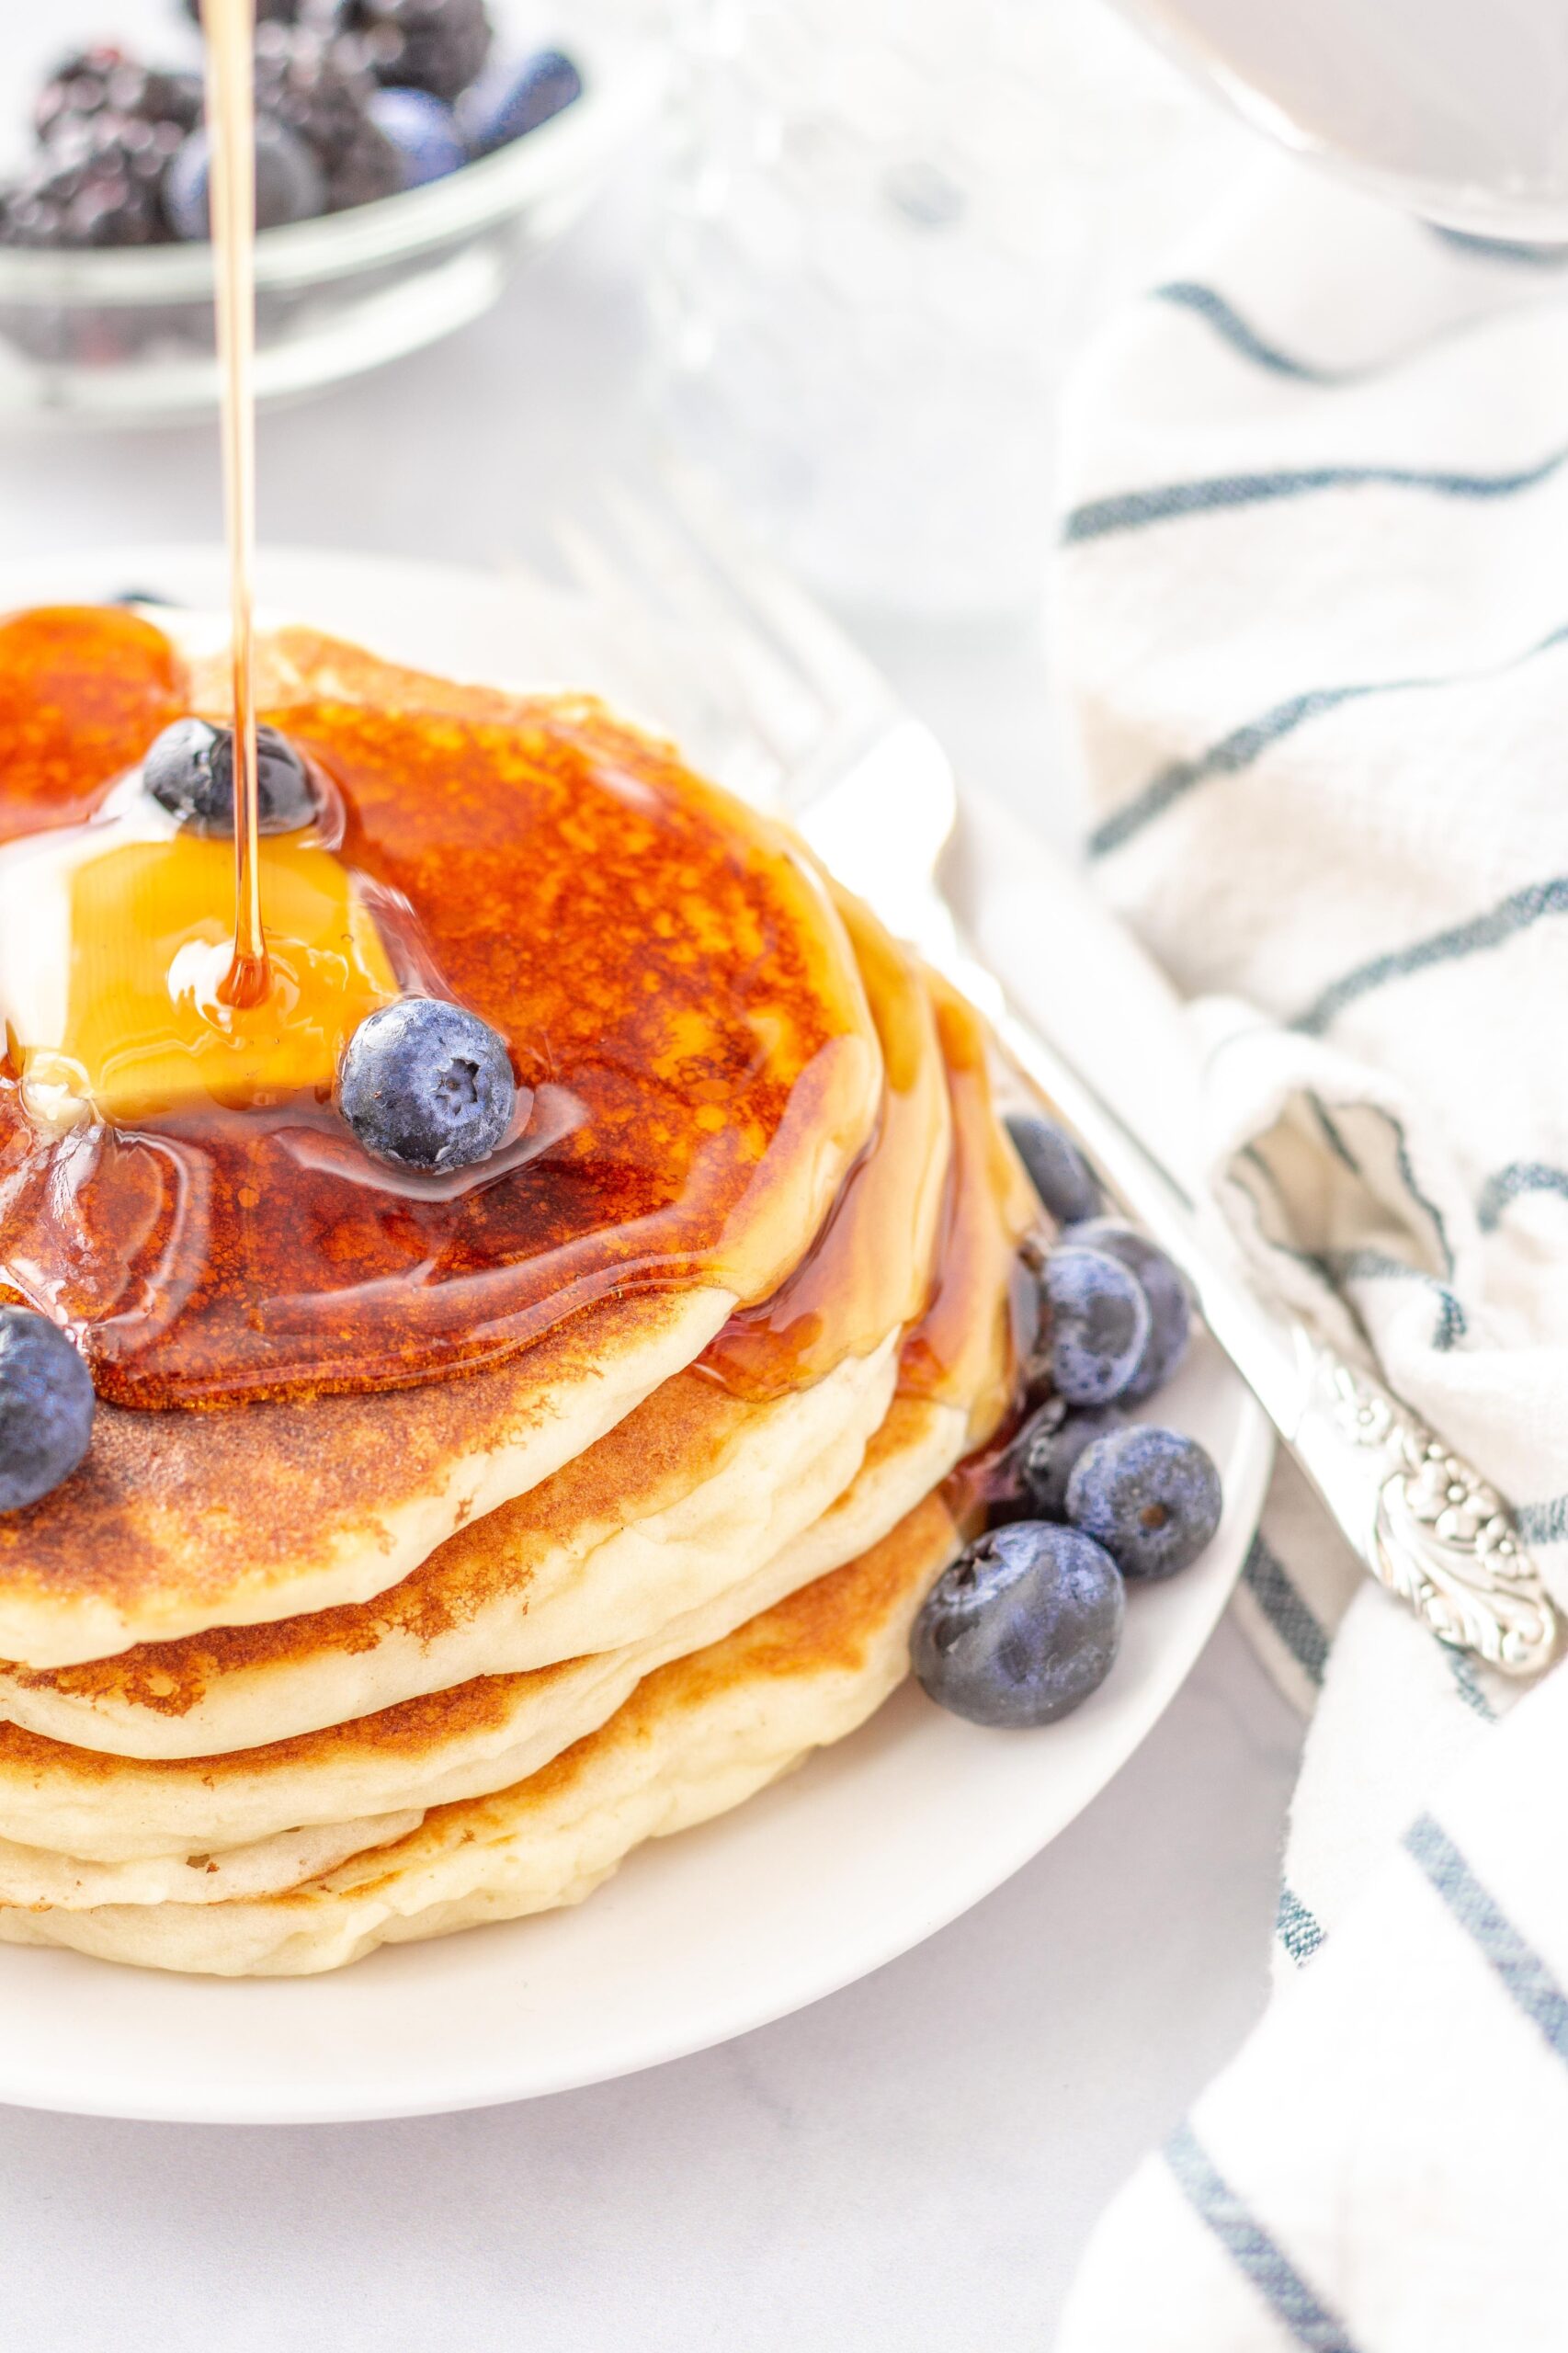  Make your breakfast special with a jumbo stack of gluten-free pancakes.